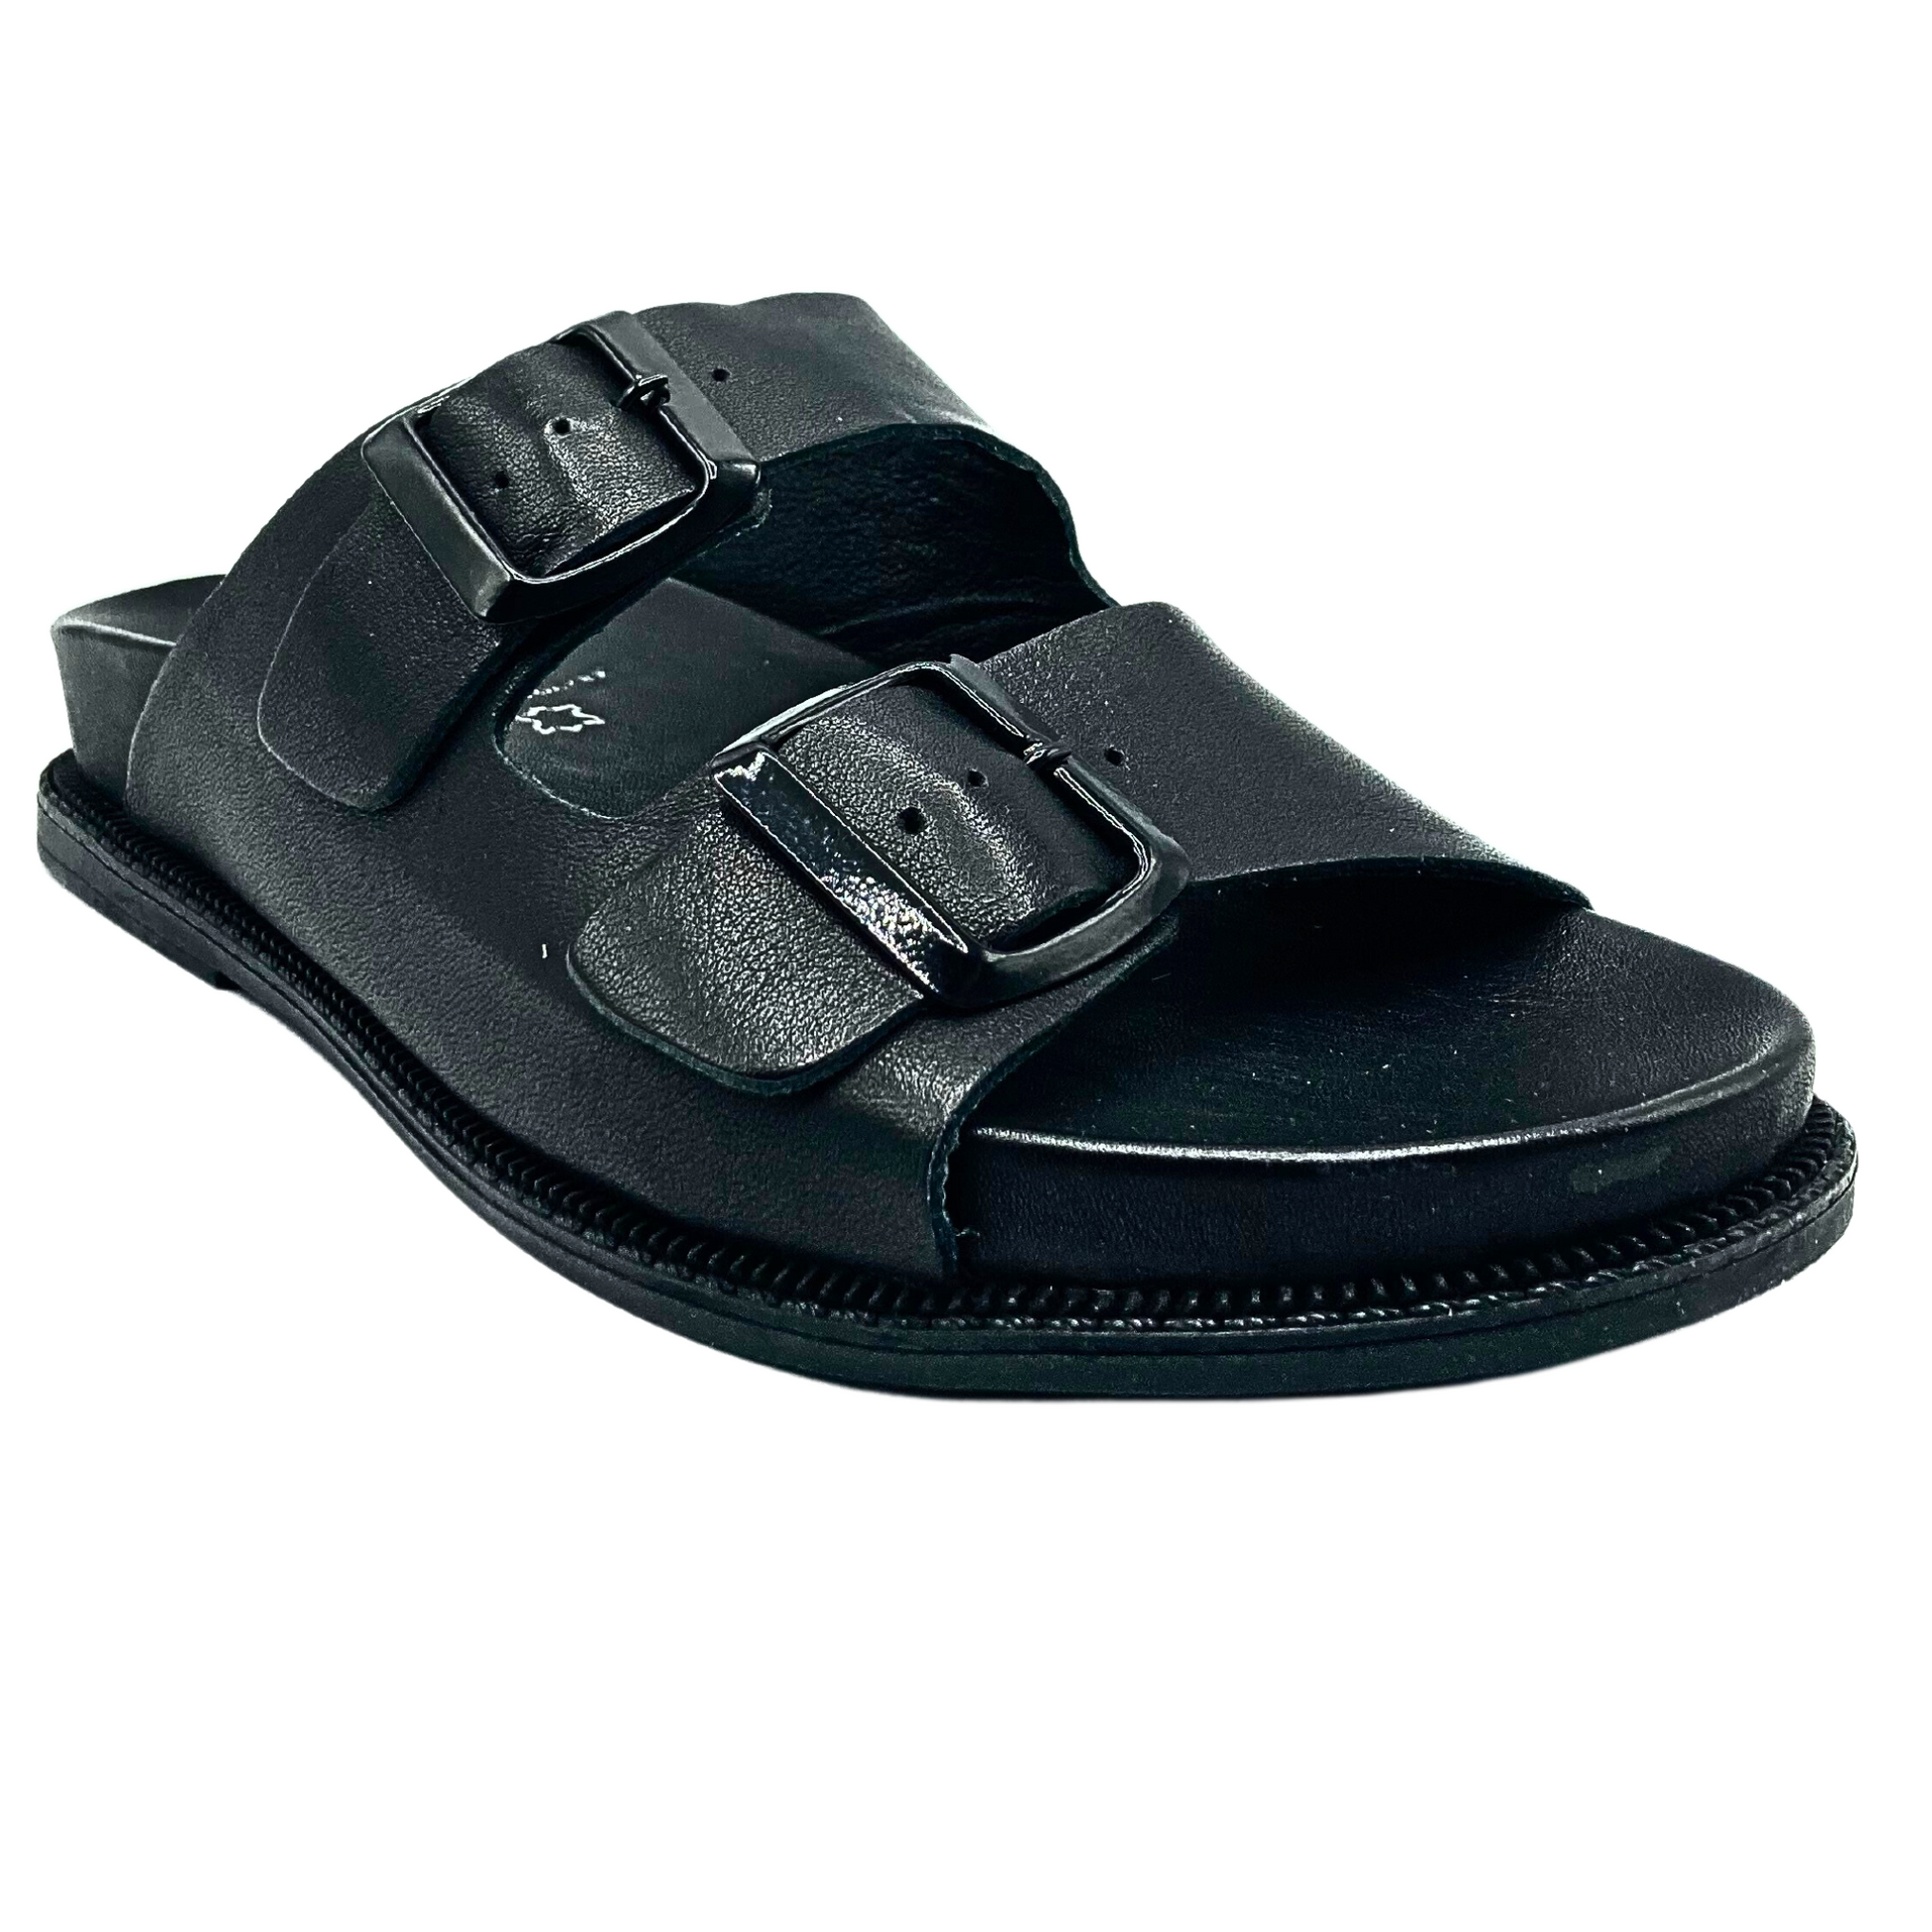 Angled side view of a black leather walking sandal.  Two adjustable wide straps across the top.  Open toe and heel